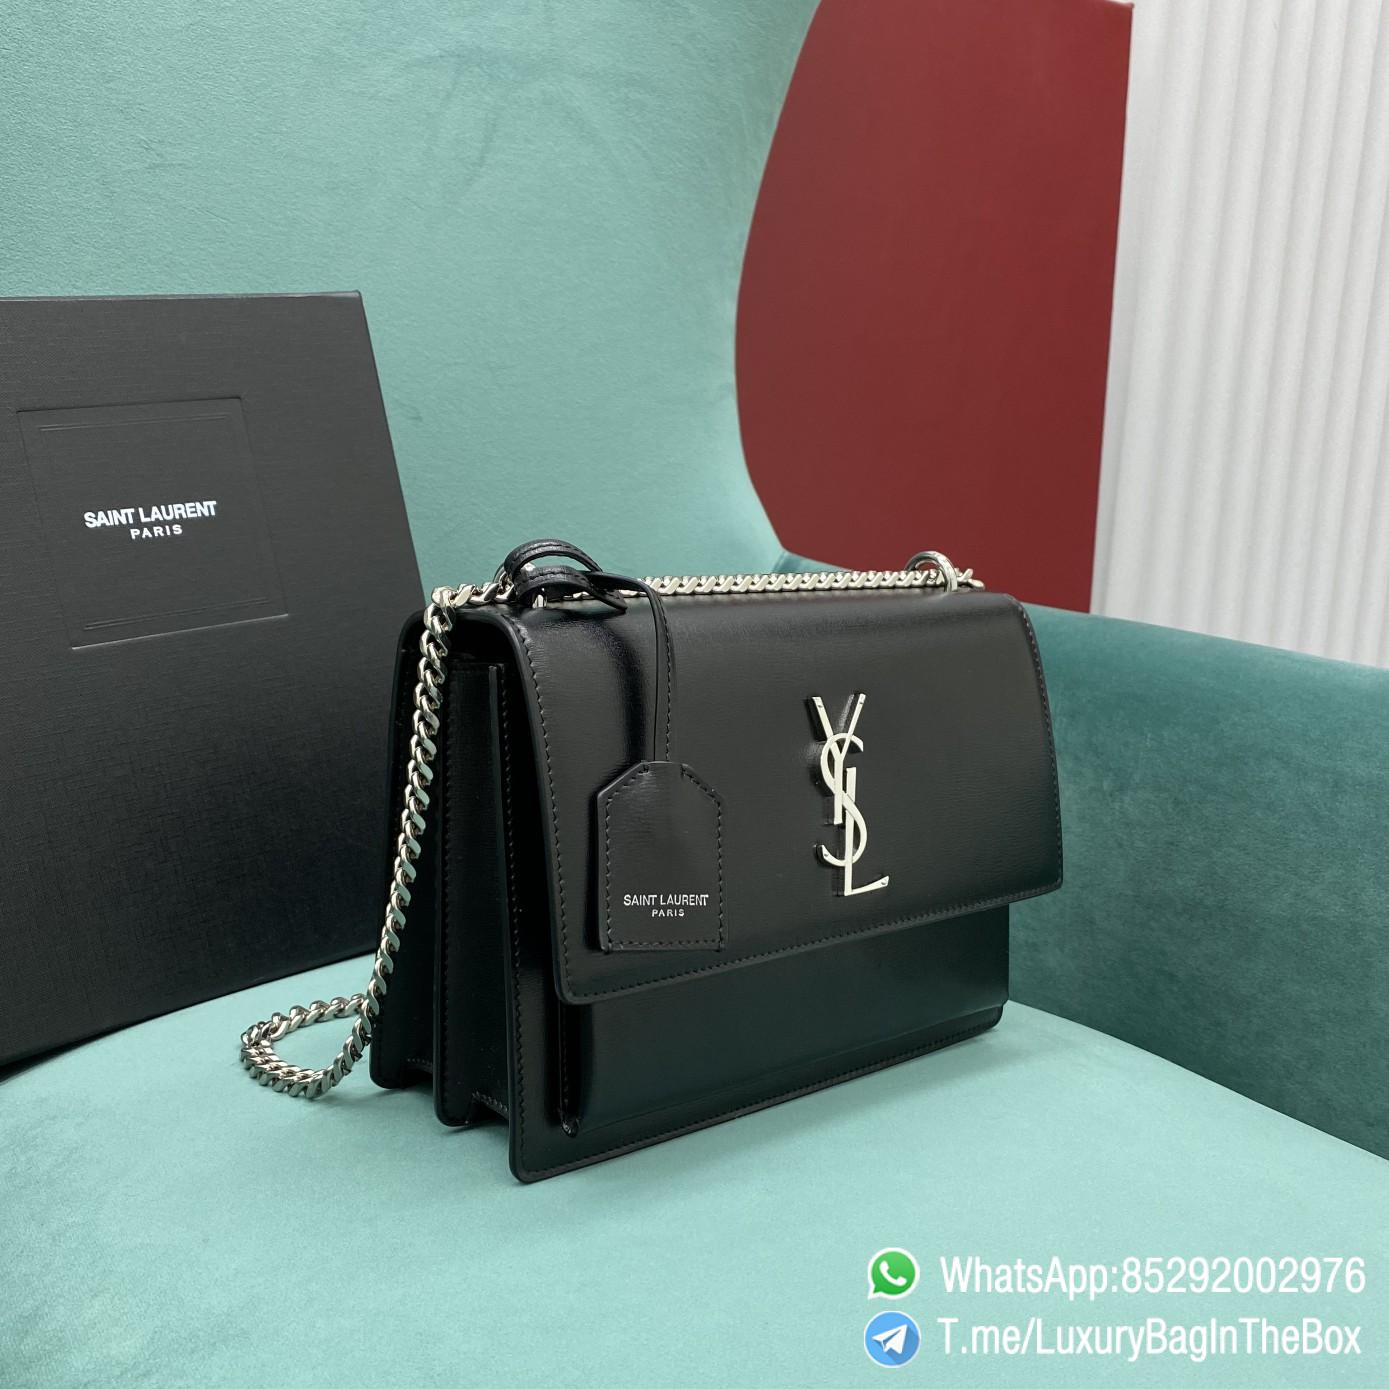 Best Replica YSL Sunset Handbag Black Smooth Leather with Front Flap Chain and Leather Shoulder Strap Silver Metal YSL Initials SKU 442906D420N1000 02